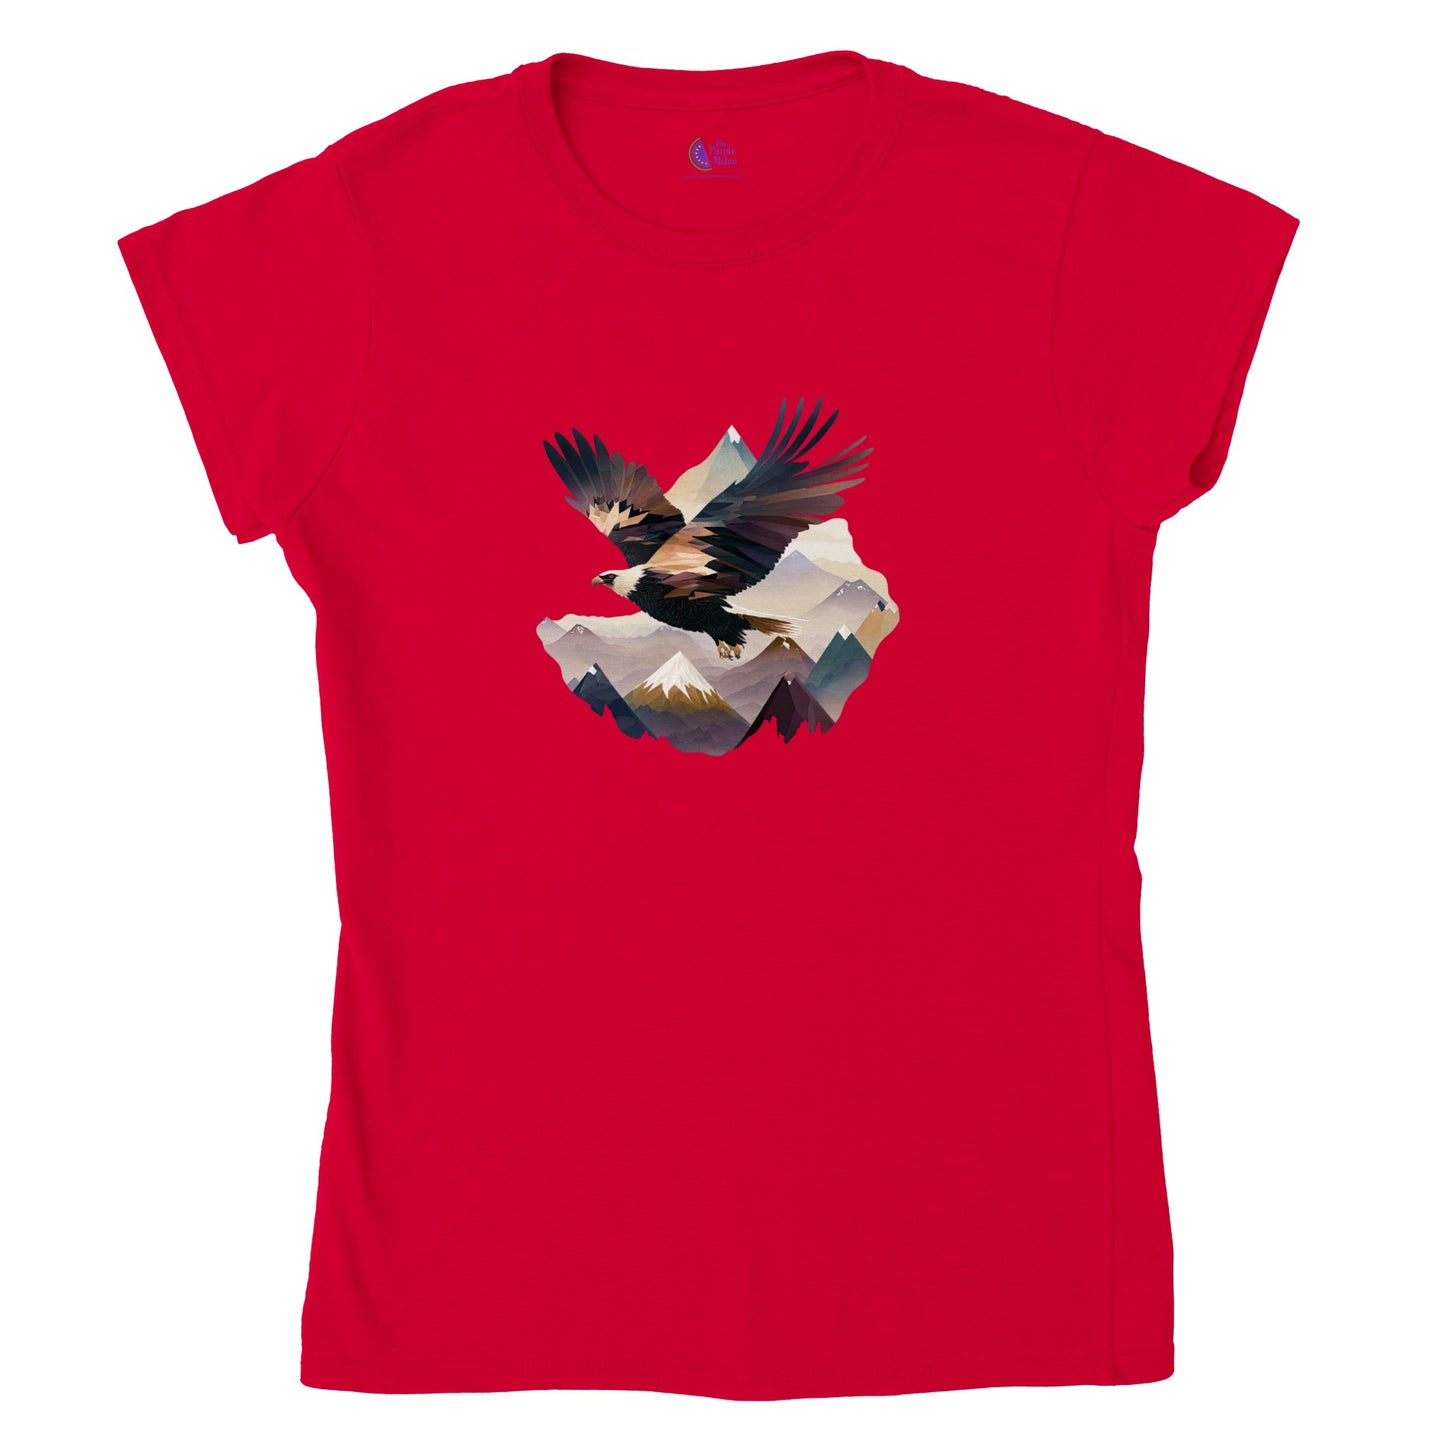 Red t-shirt with an eagle flying over a mountain range print